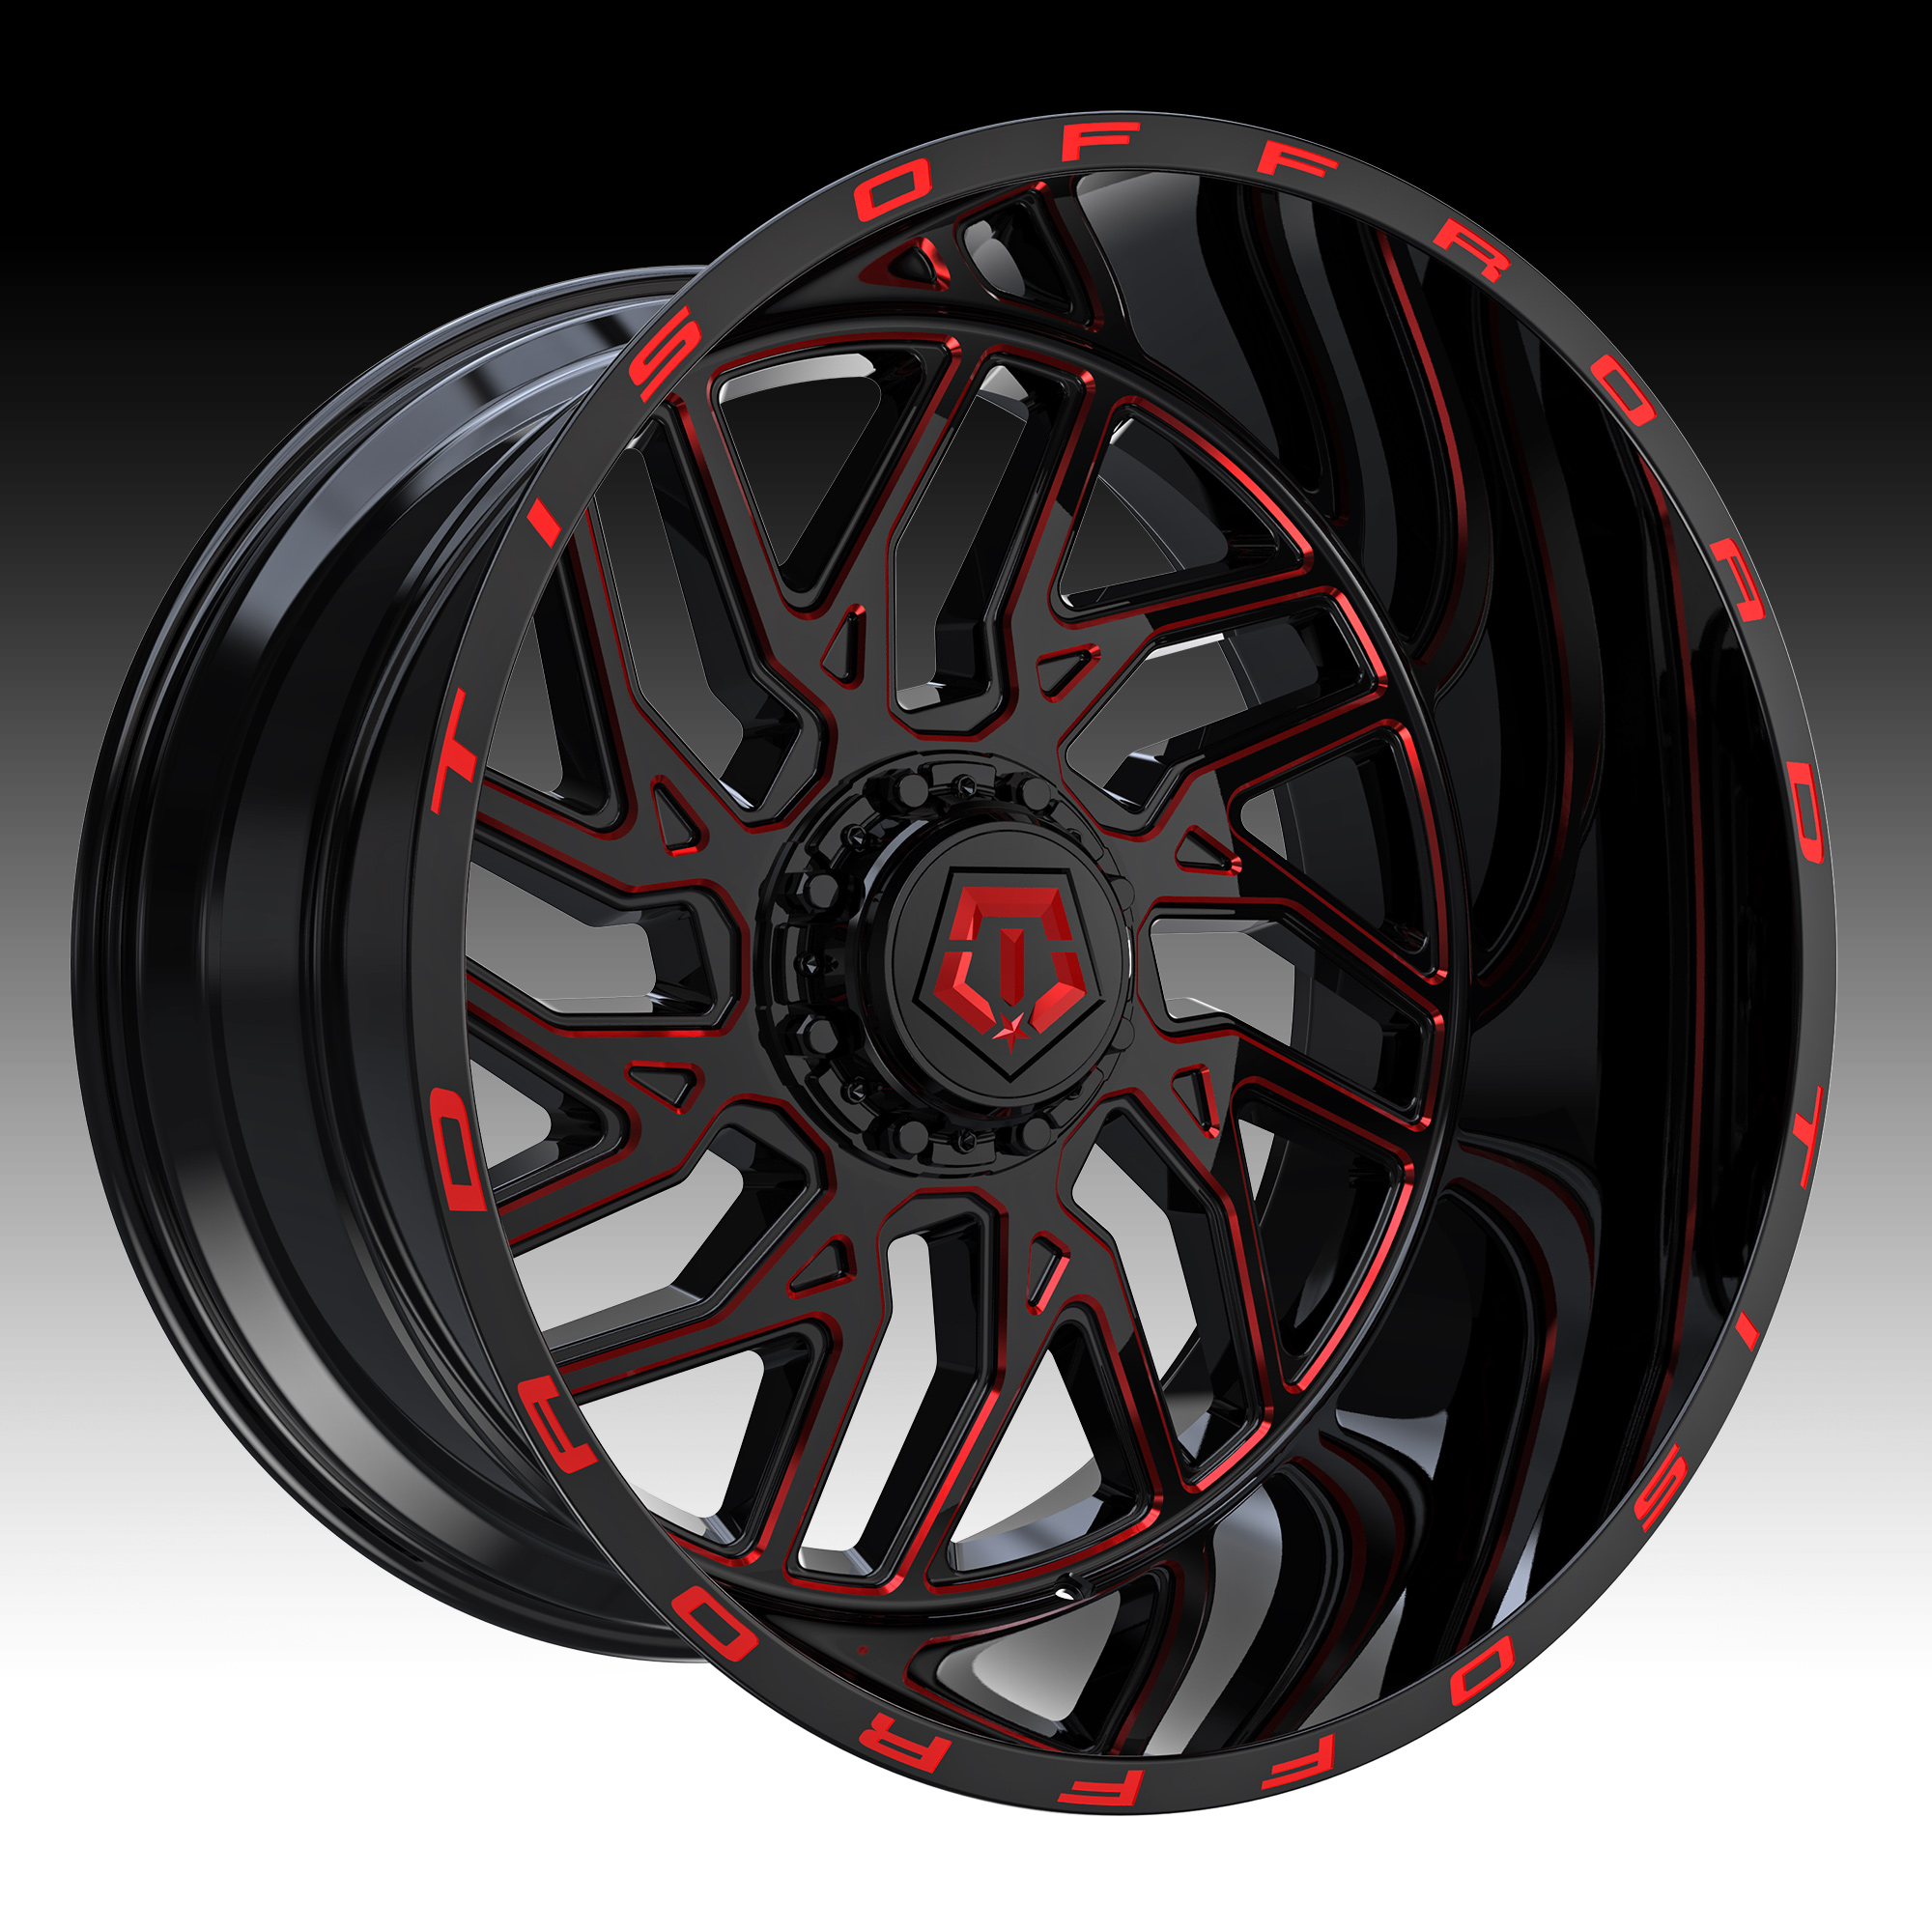 TIS Wheels 544BMR Gloss Black Milled Red Tint Custom Wheels Rims - 544BMR -  Discontinued TIS Wheels - Custom Wheels for Trucks, Jeeps, SUVs and  Passenger Cars